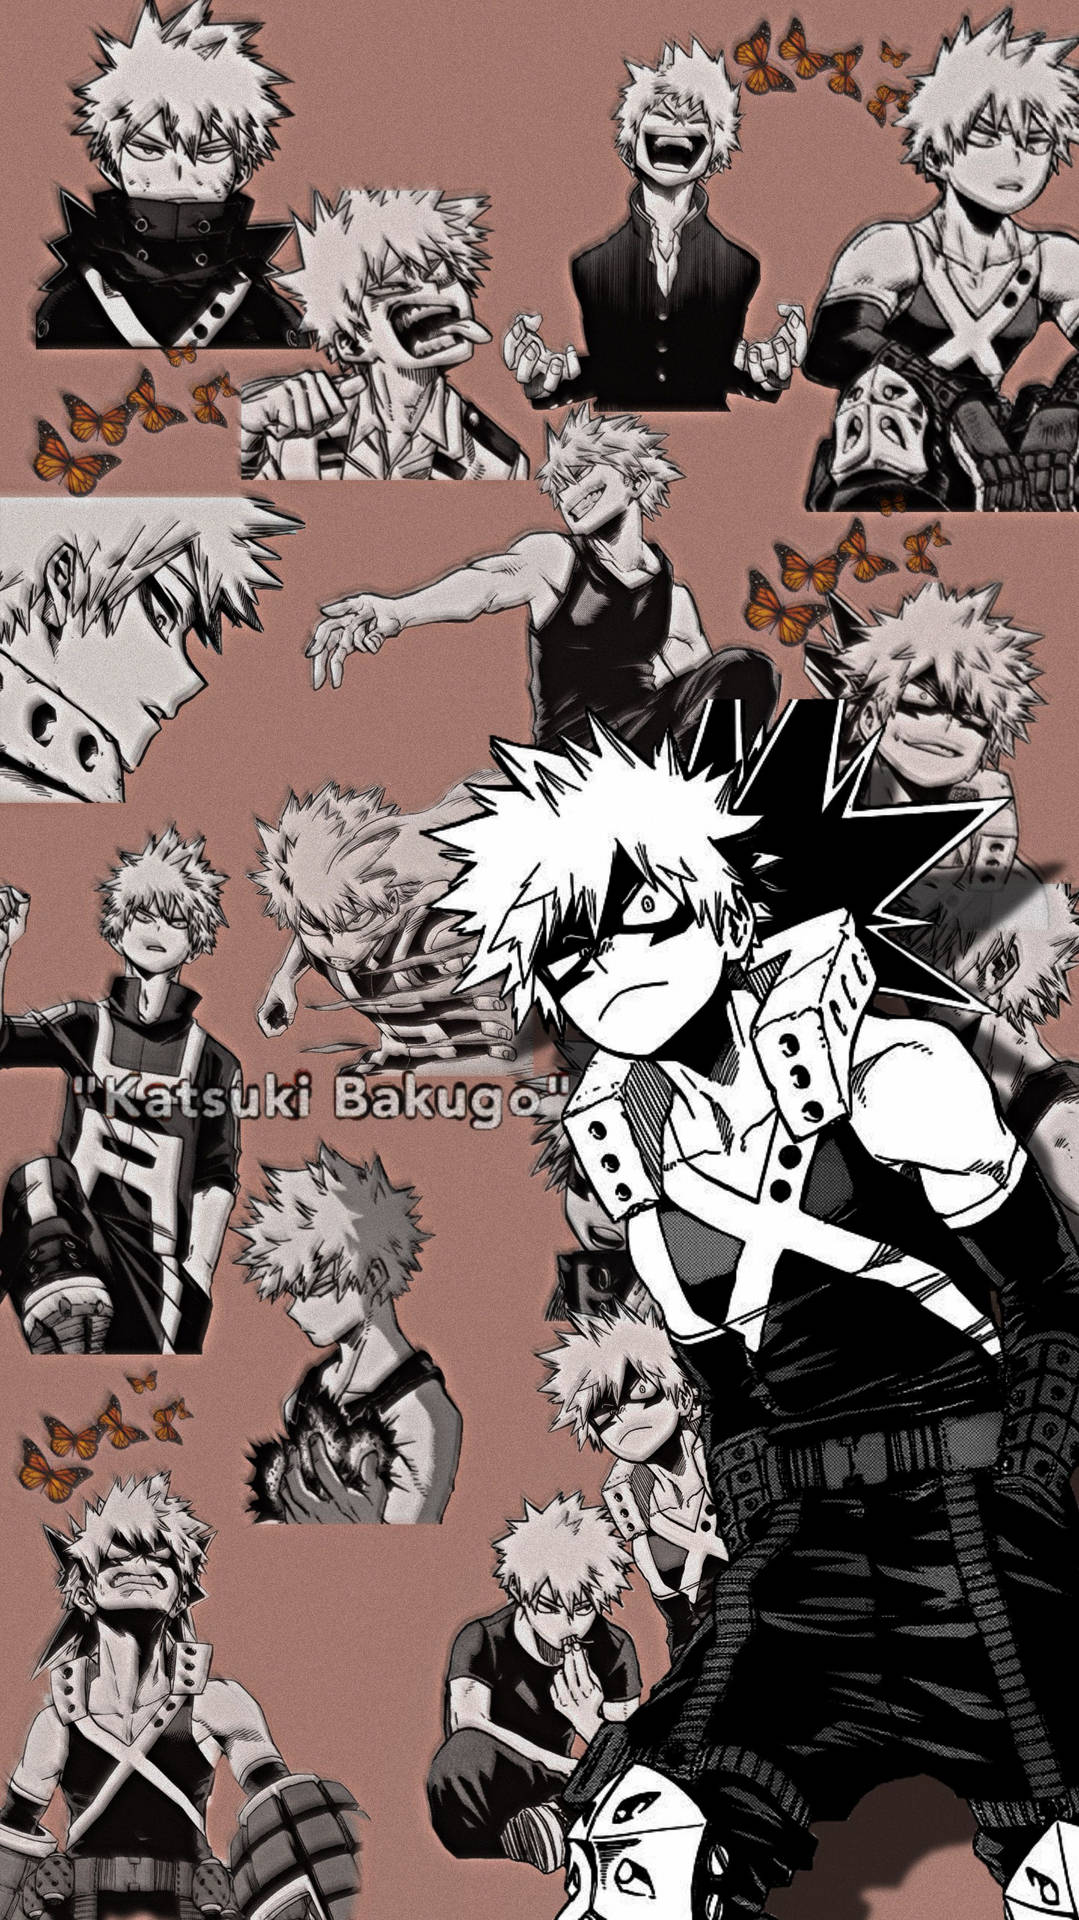 A collection of different images with the same character - My Hero Academia, Bakugo